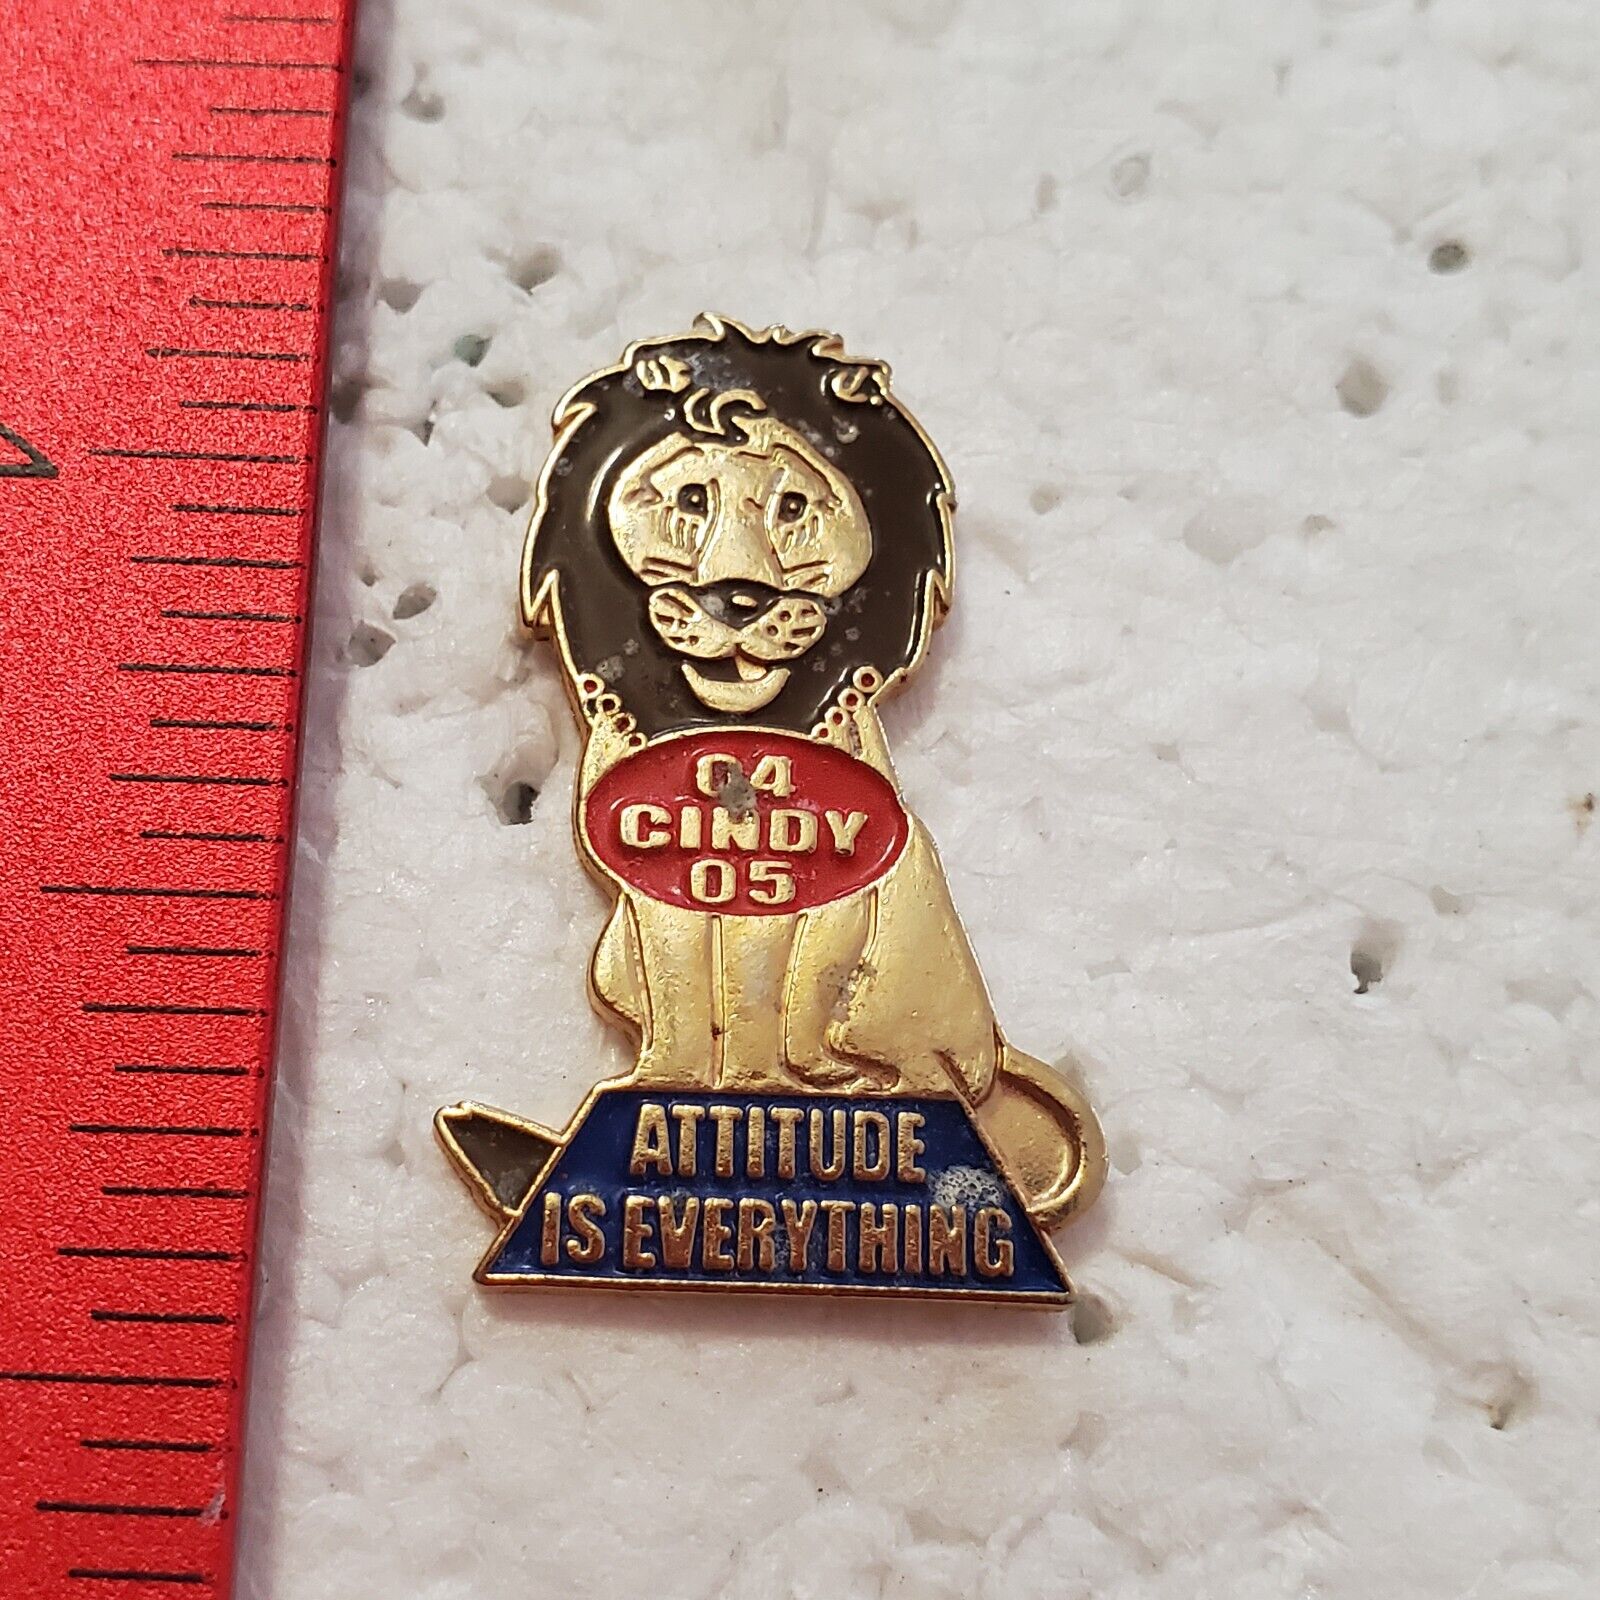 VTG VFW 2004 - 2005 Cindy Lion Attitude is Everything Logo Lapel Hat Pin Tie Tac